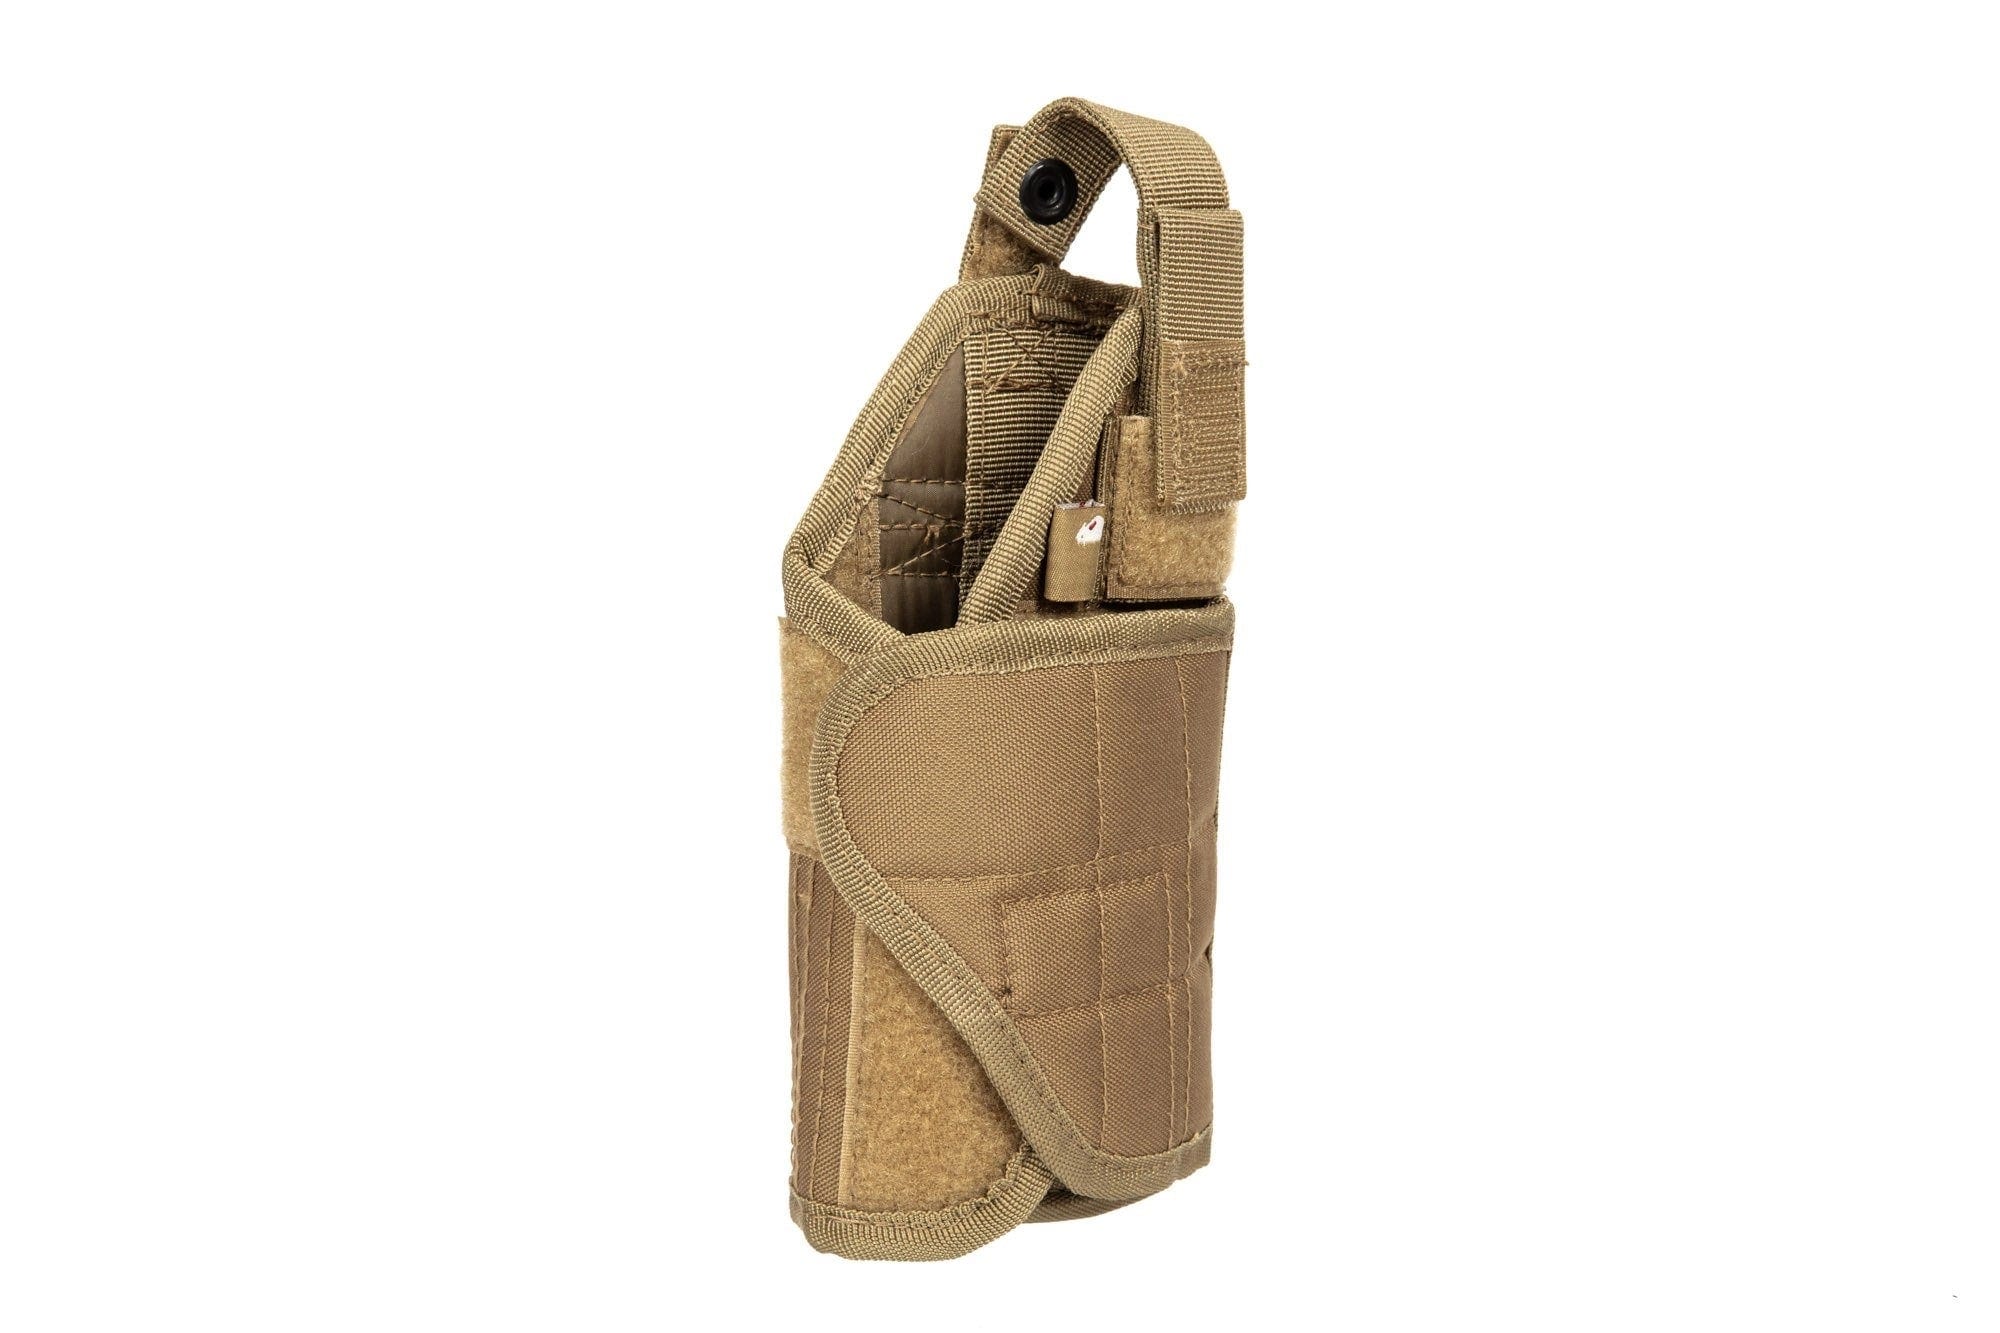 MOLLE adjustable universal holster - Coyote